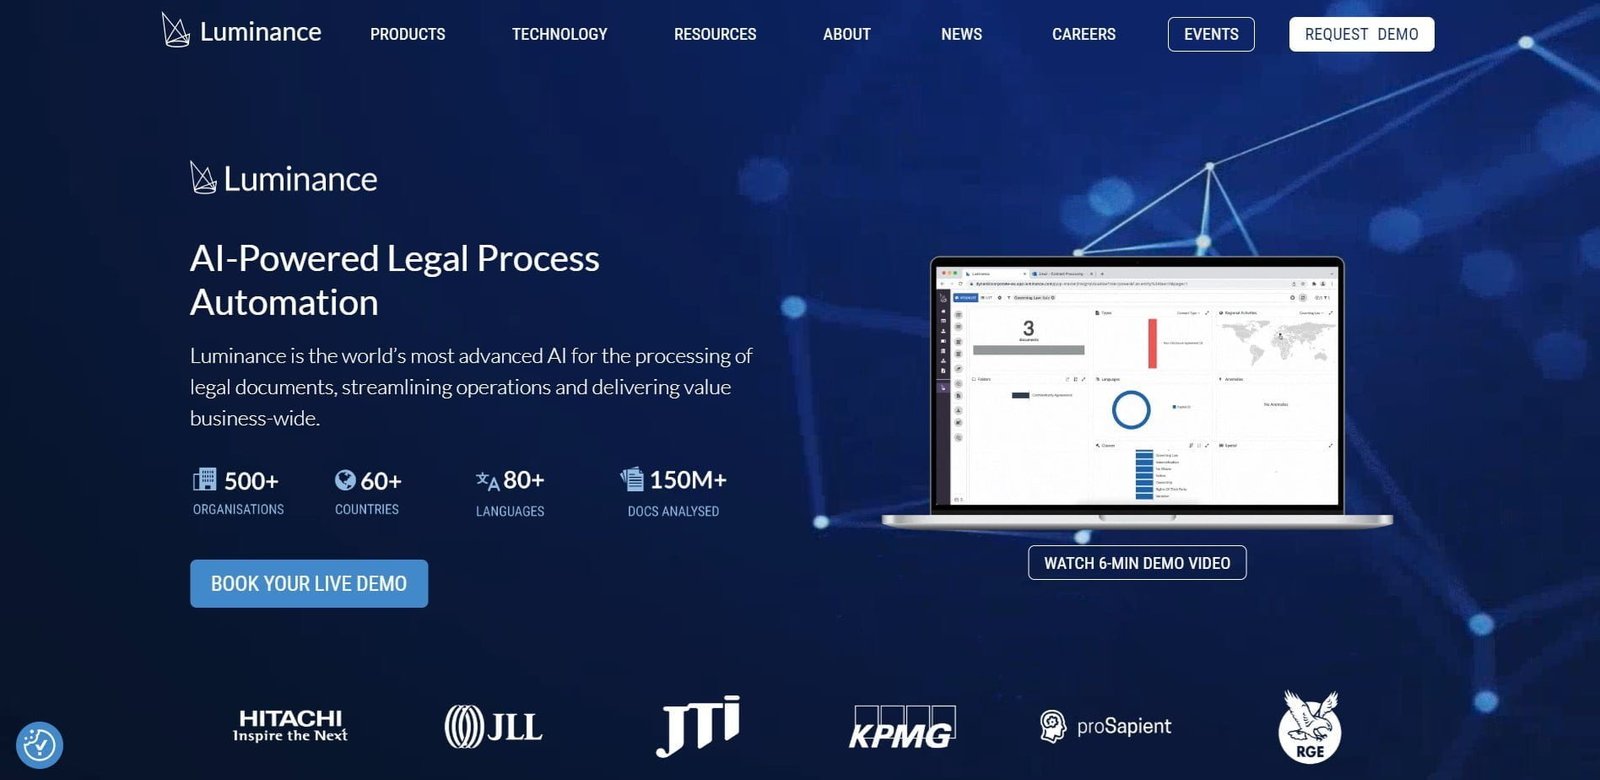 Luminance is an AI law and legal process automation platform designed to streamline legal operations and deliver value across various business sectors. 